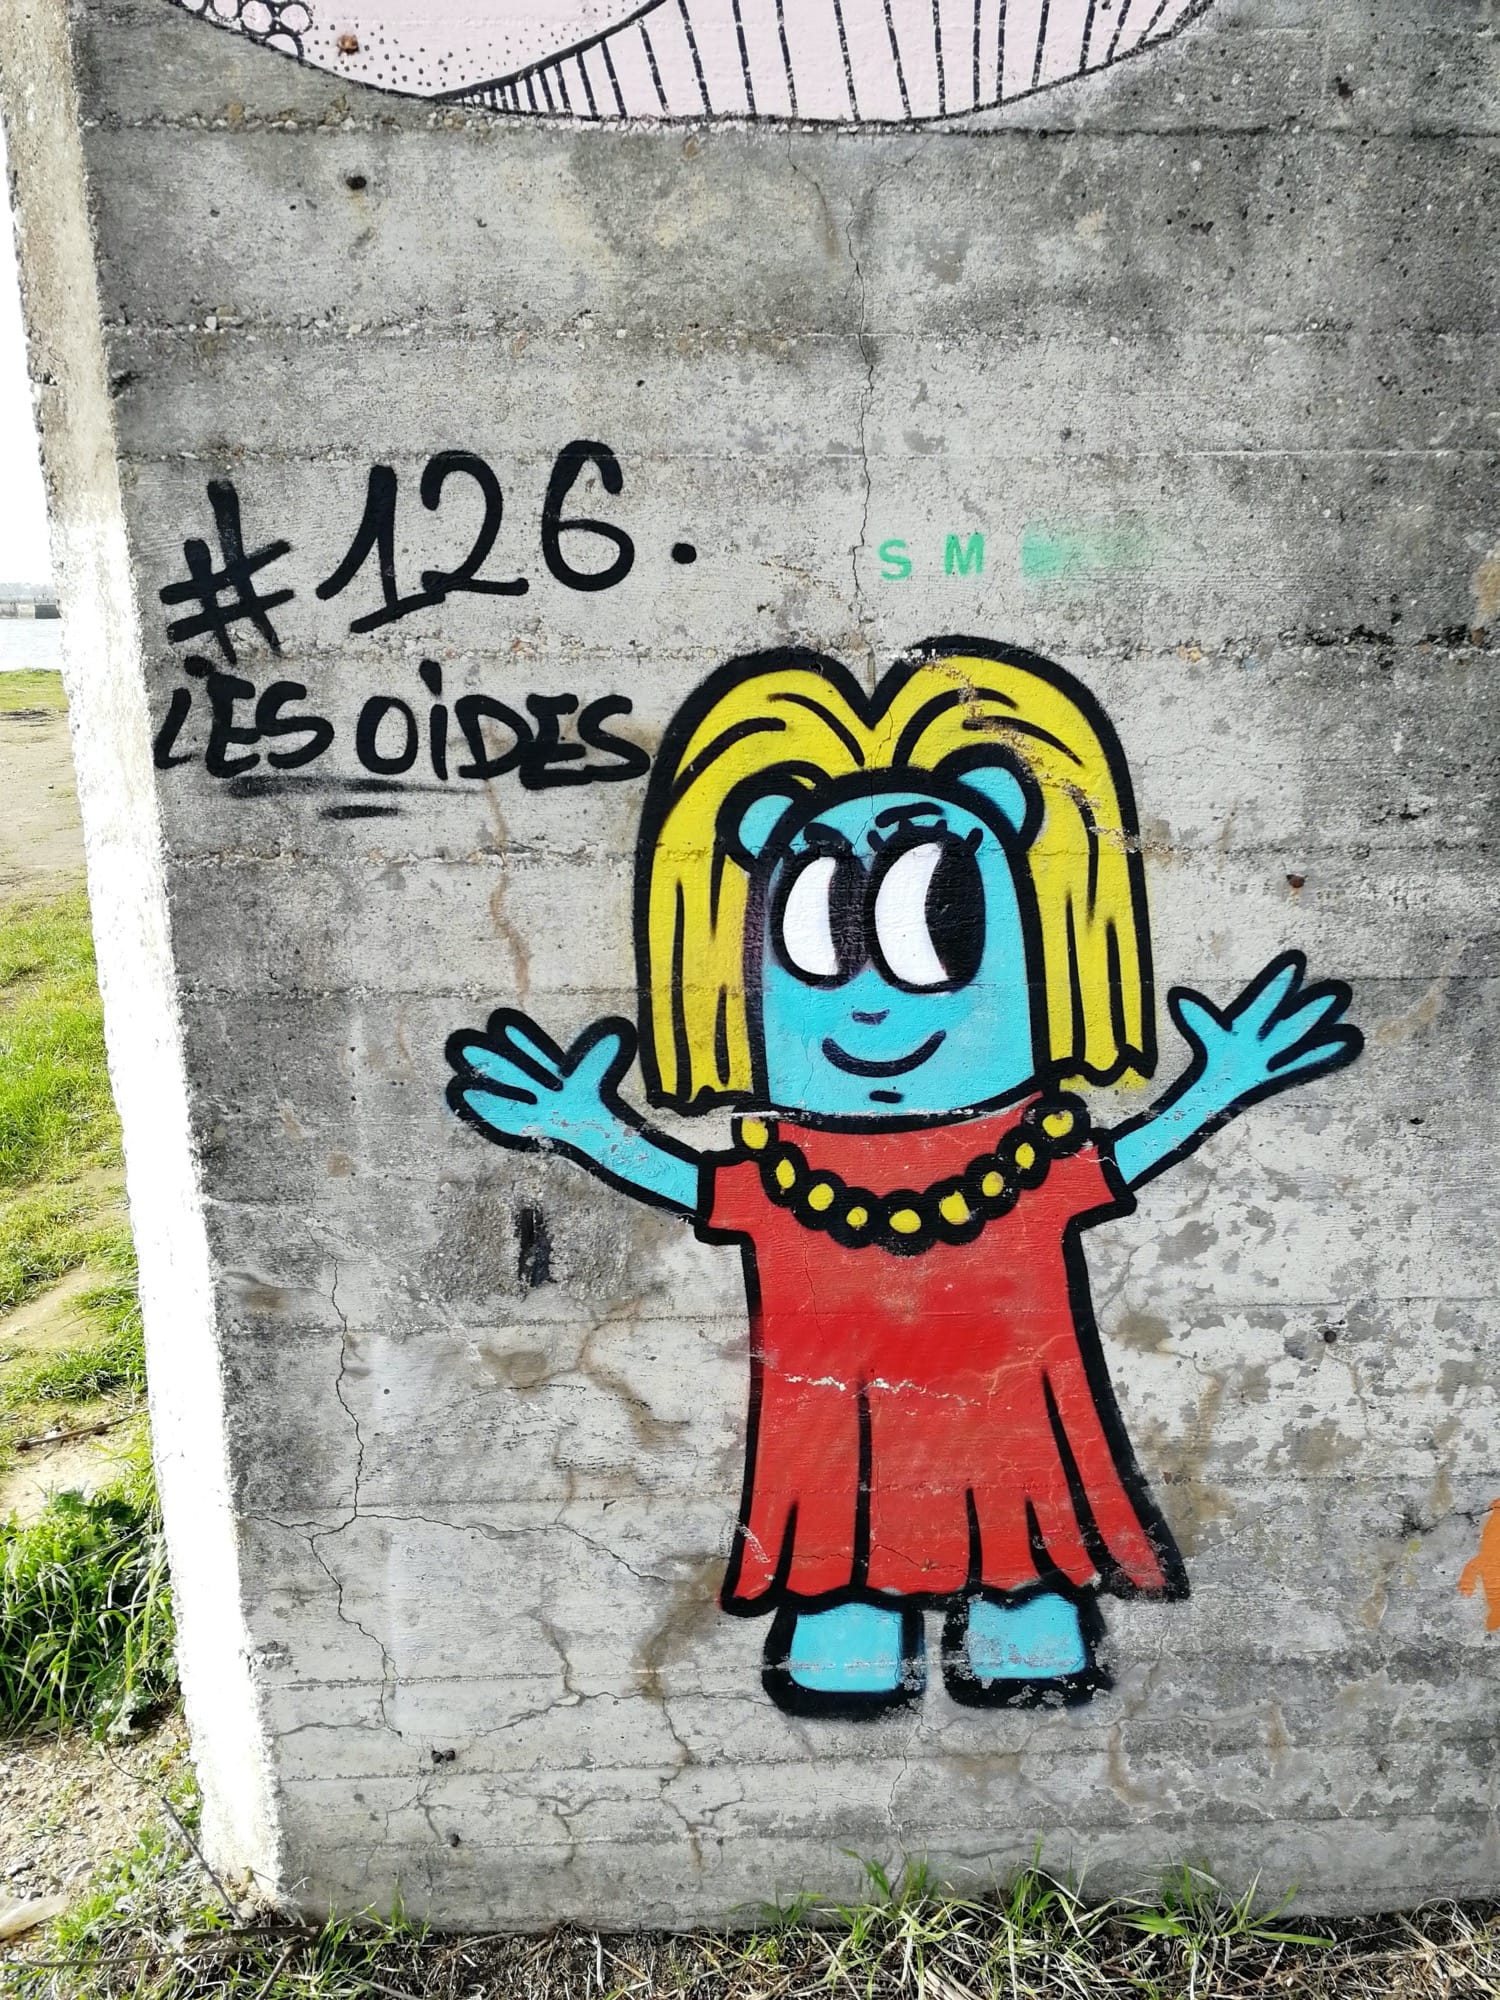 Graffiti 1336 Les oides #126 by the artist Les Oides captured by Rabot in Saint-Nazaire France